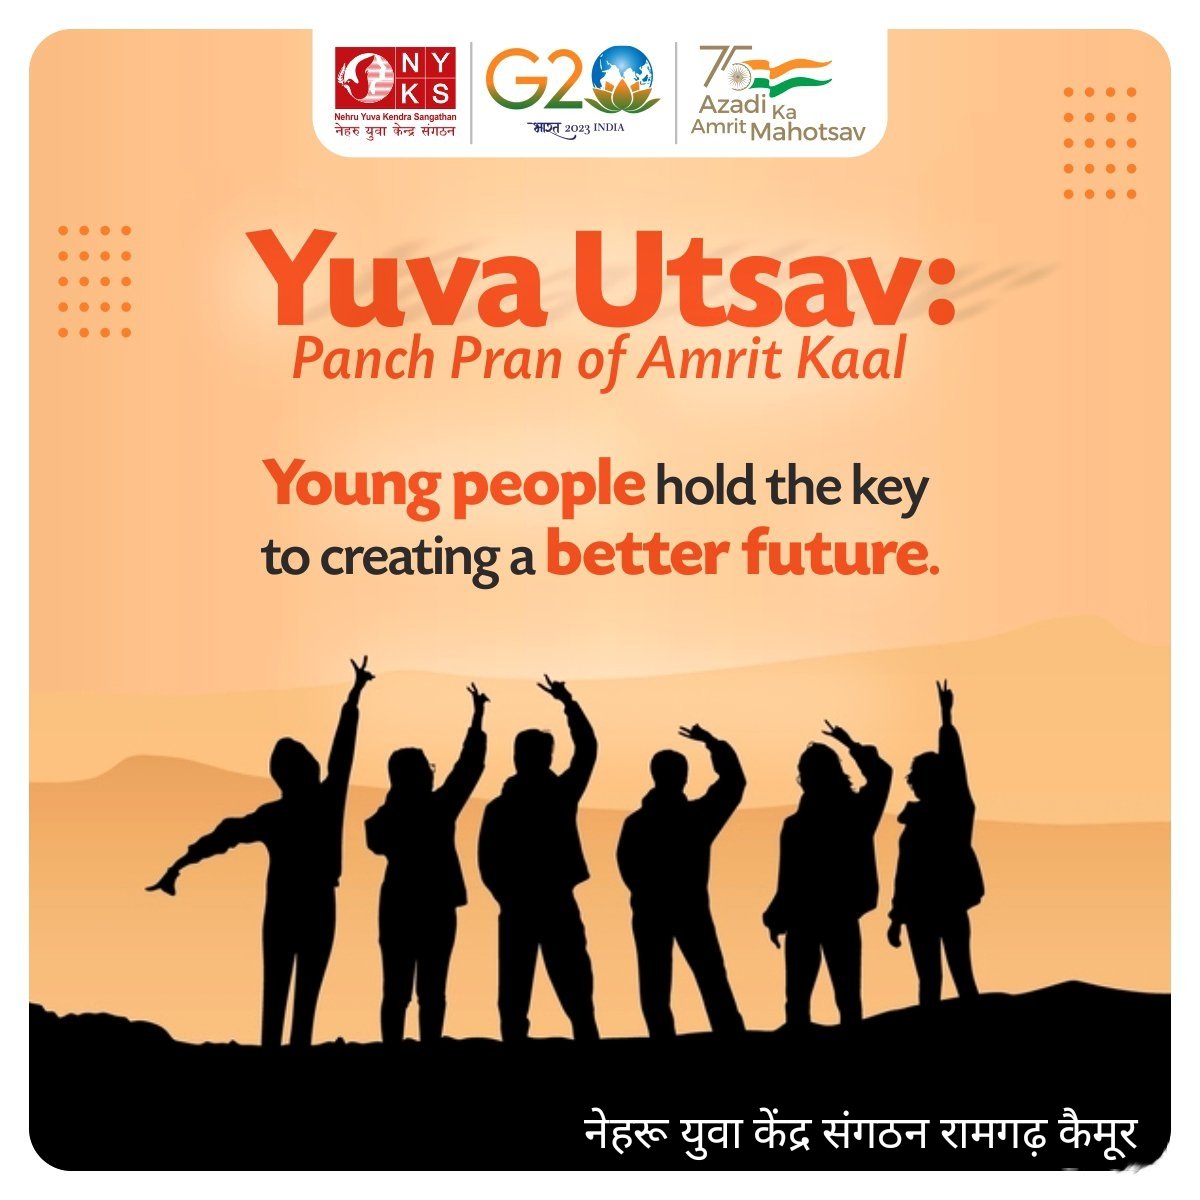 Quote of the Day!

Young people are the most affected by the crises facing our world. They are also the ones with the most innovative ideas and energy to build a better society for tomorrow.

#NyksYuvaUtsav #YuvaUtsav2023 #YouthProgram